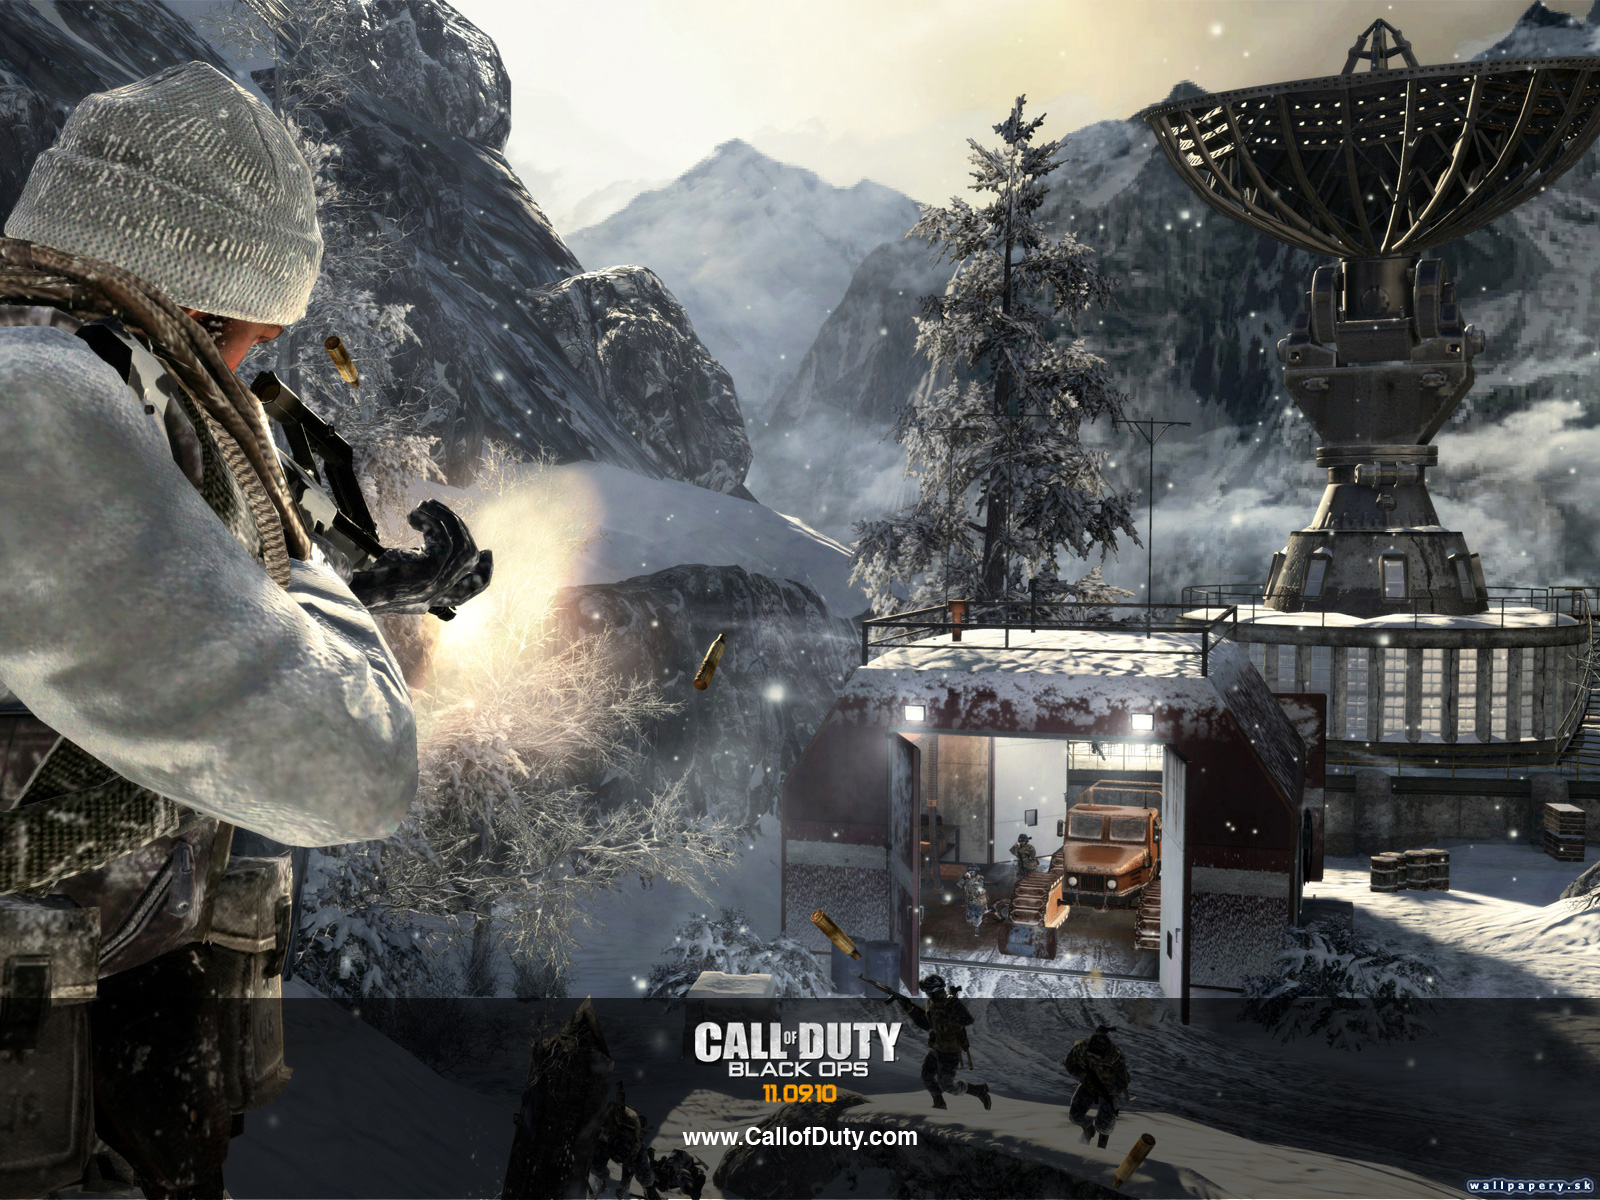 Call of Duty: Black Ops - wallpaper 18